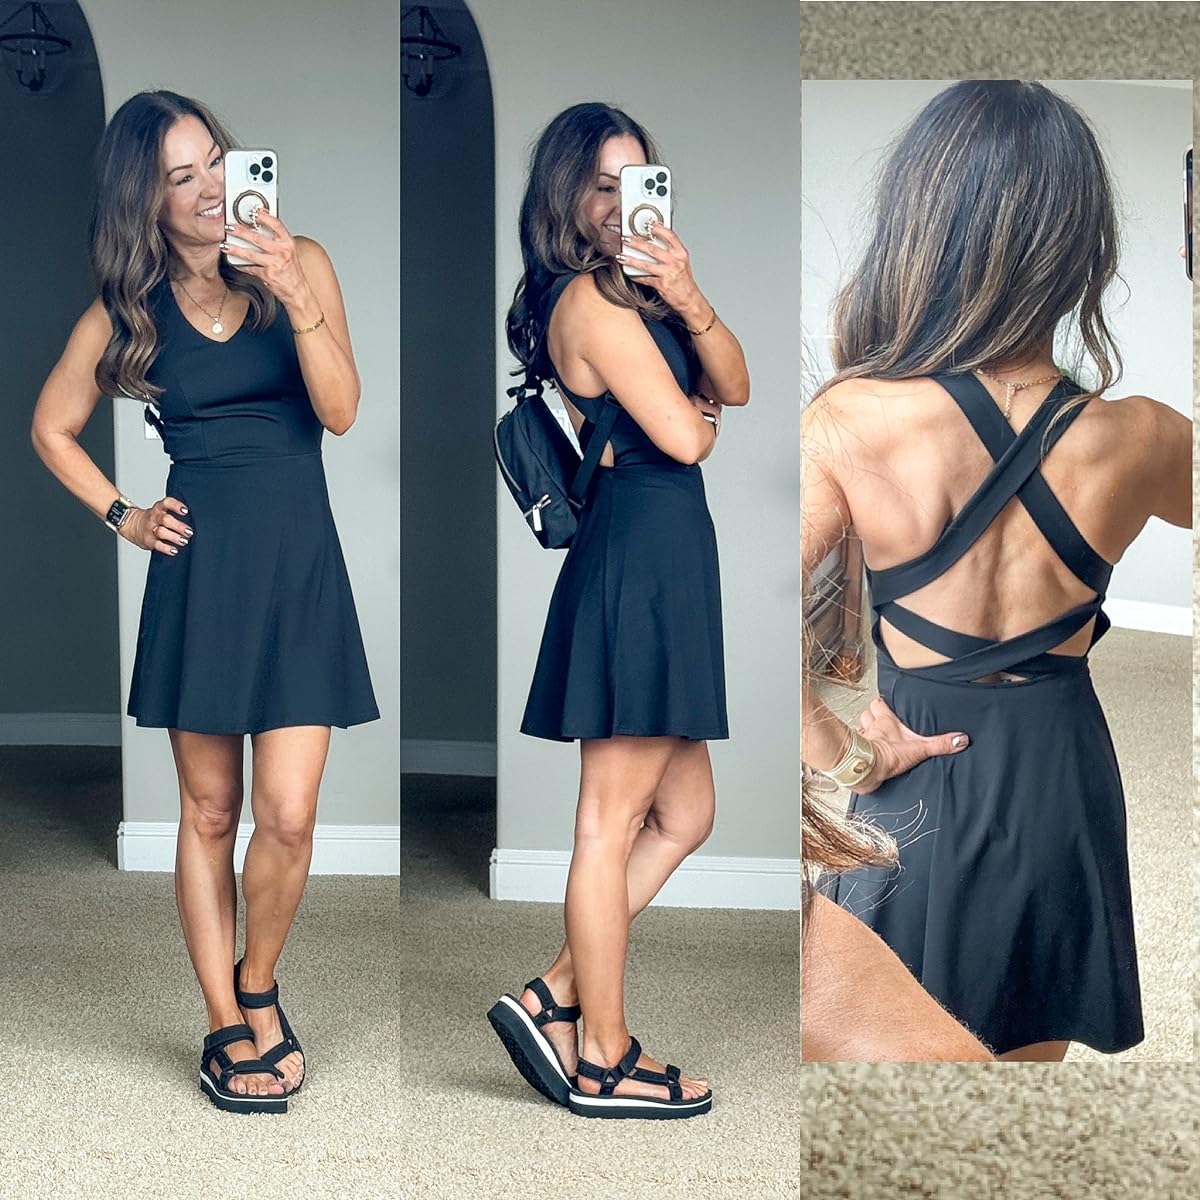 new and trending activewear + athleisure styles amazon | activewear, athleisure, workout clothes, gym outfit, gym clothes, amazon fashion, mini dress, tennis dress, sandals, adventurer backpack, pickleball outfit